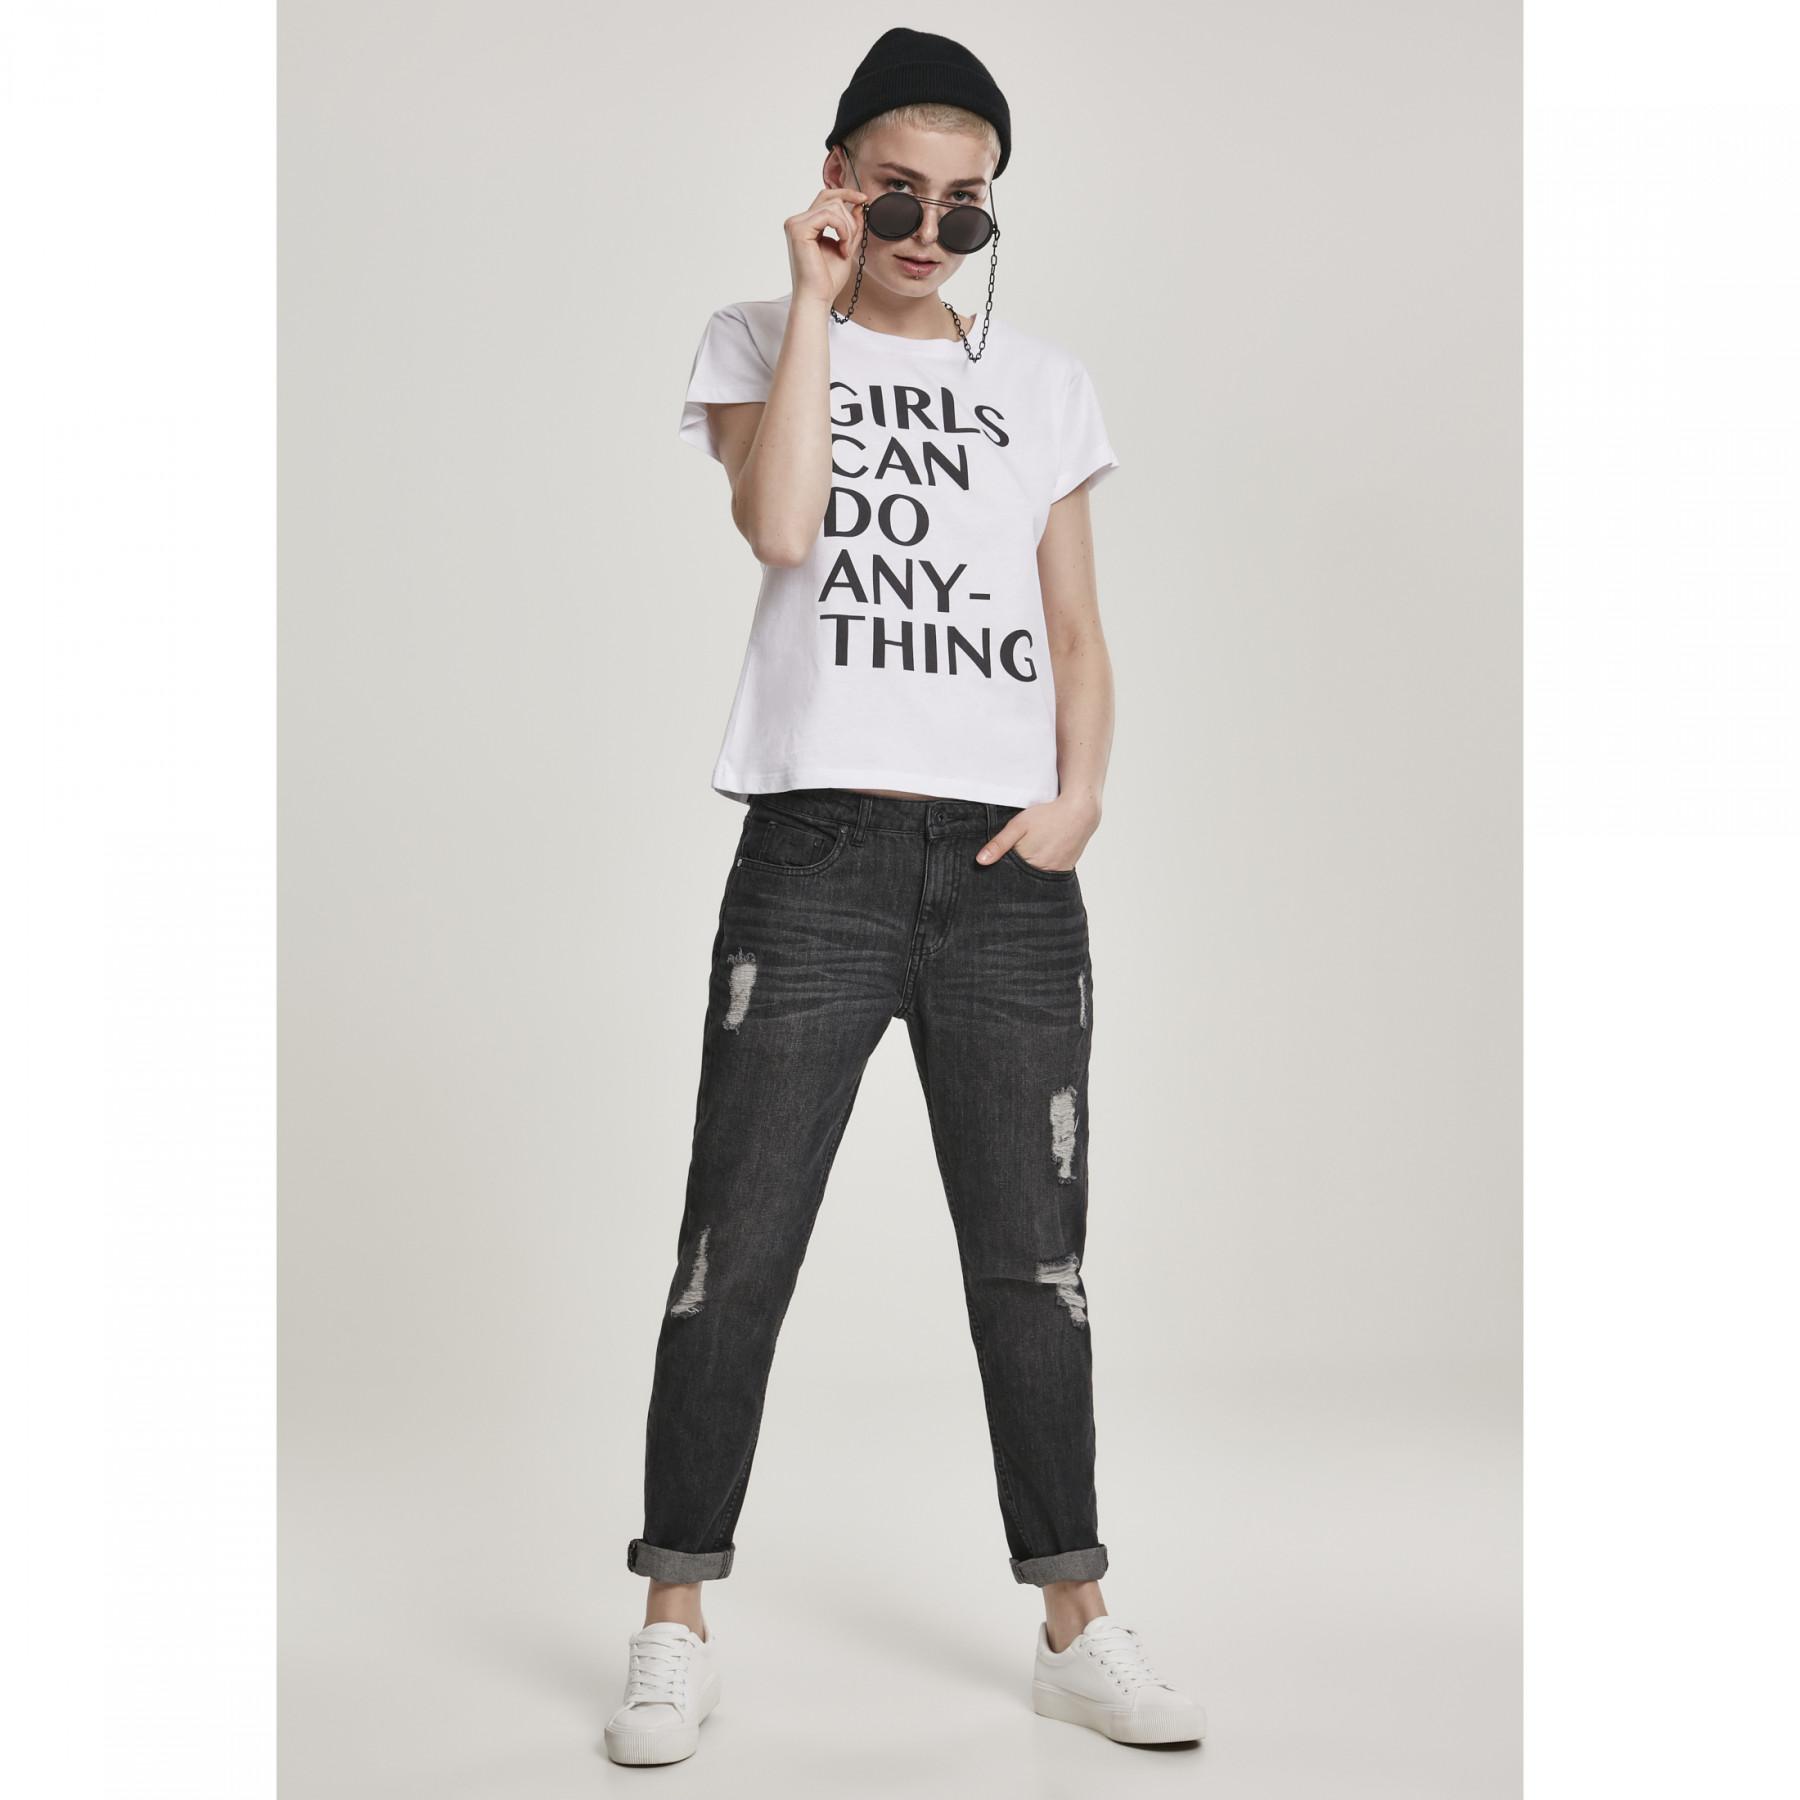 Women's T-shirt Mister Tee girl can do anything